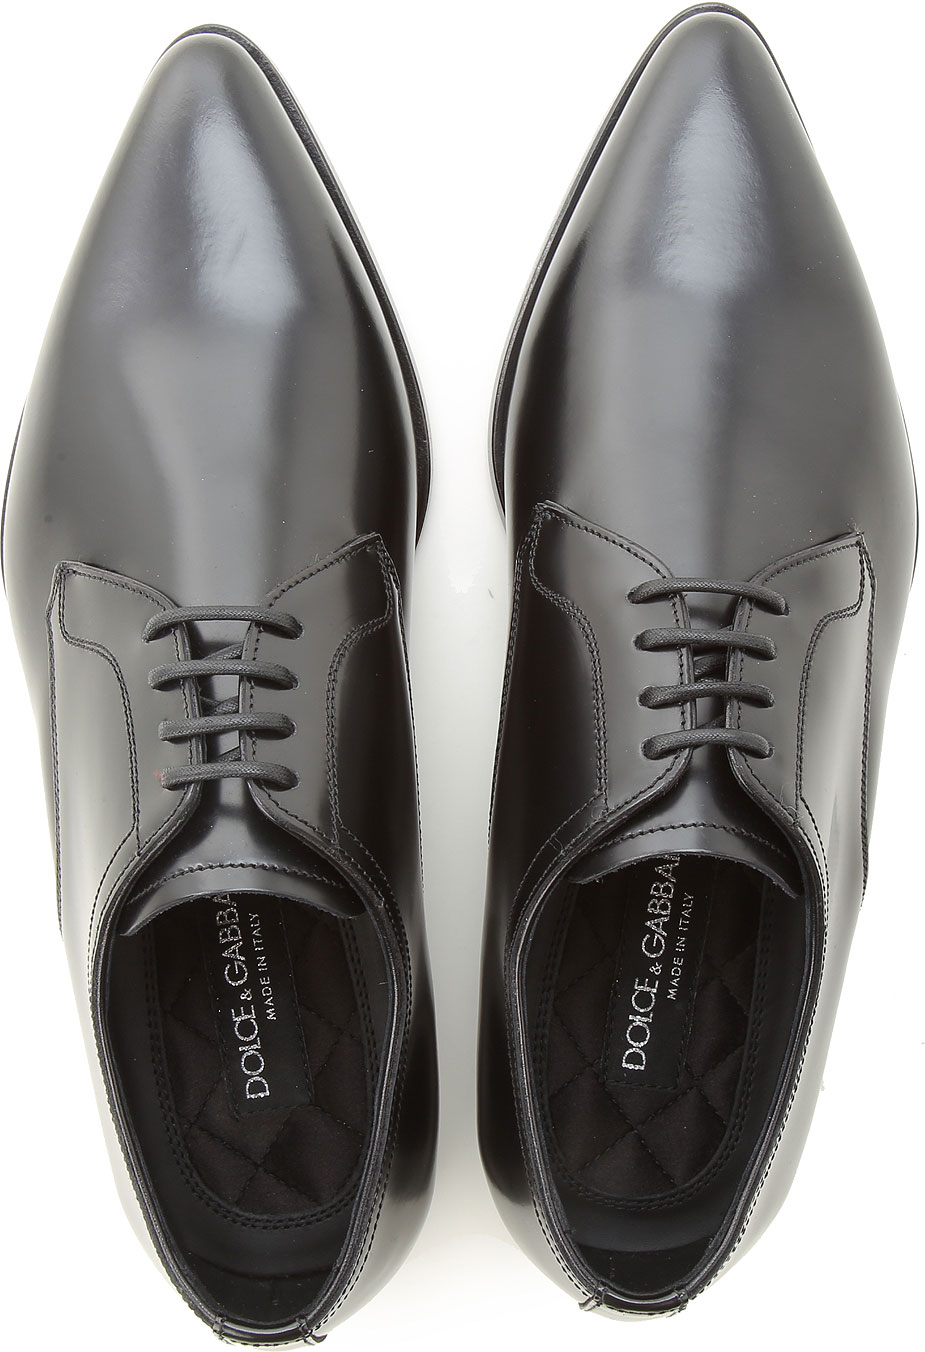 Mens Shoes Dolce & Gabbana, Style code: a10587-aa384-80999